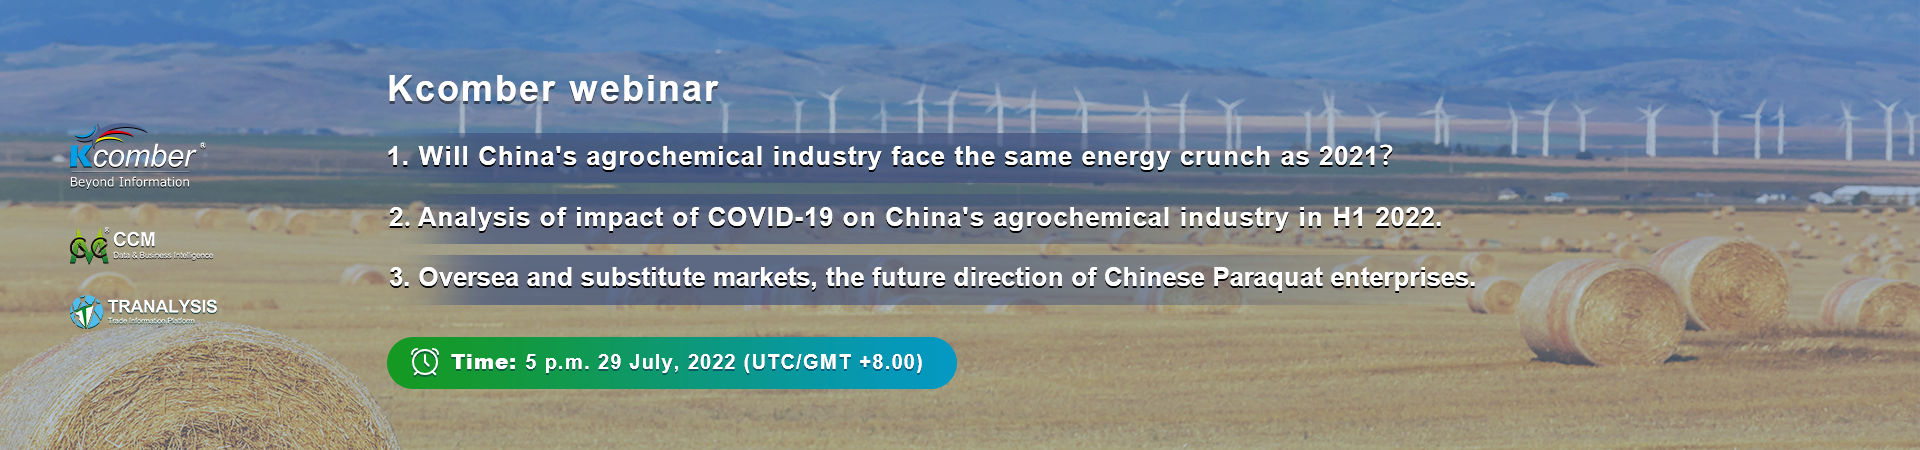 Retrospective study on impact of COVID-19 and future development of China agrochemical industry